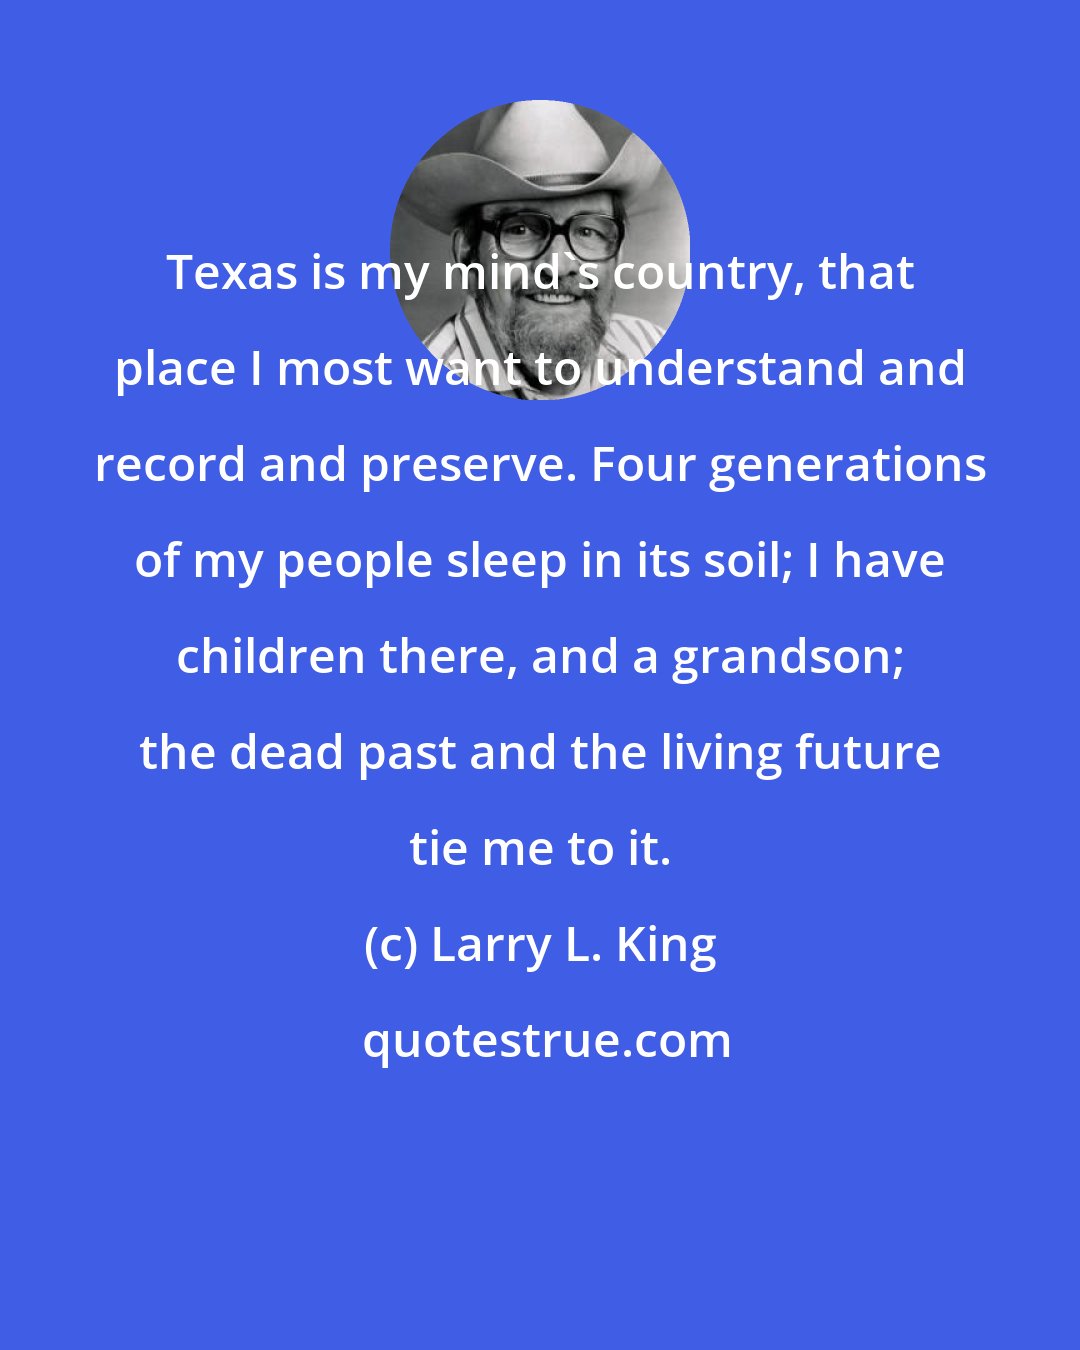 Larry L. King: Texas is my mind's country, that place I most want to understand and record and preserve. Four generations of my people sleep in its soil; I have children there, and a grandson; the dead past and the living future tie me to it.